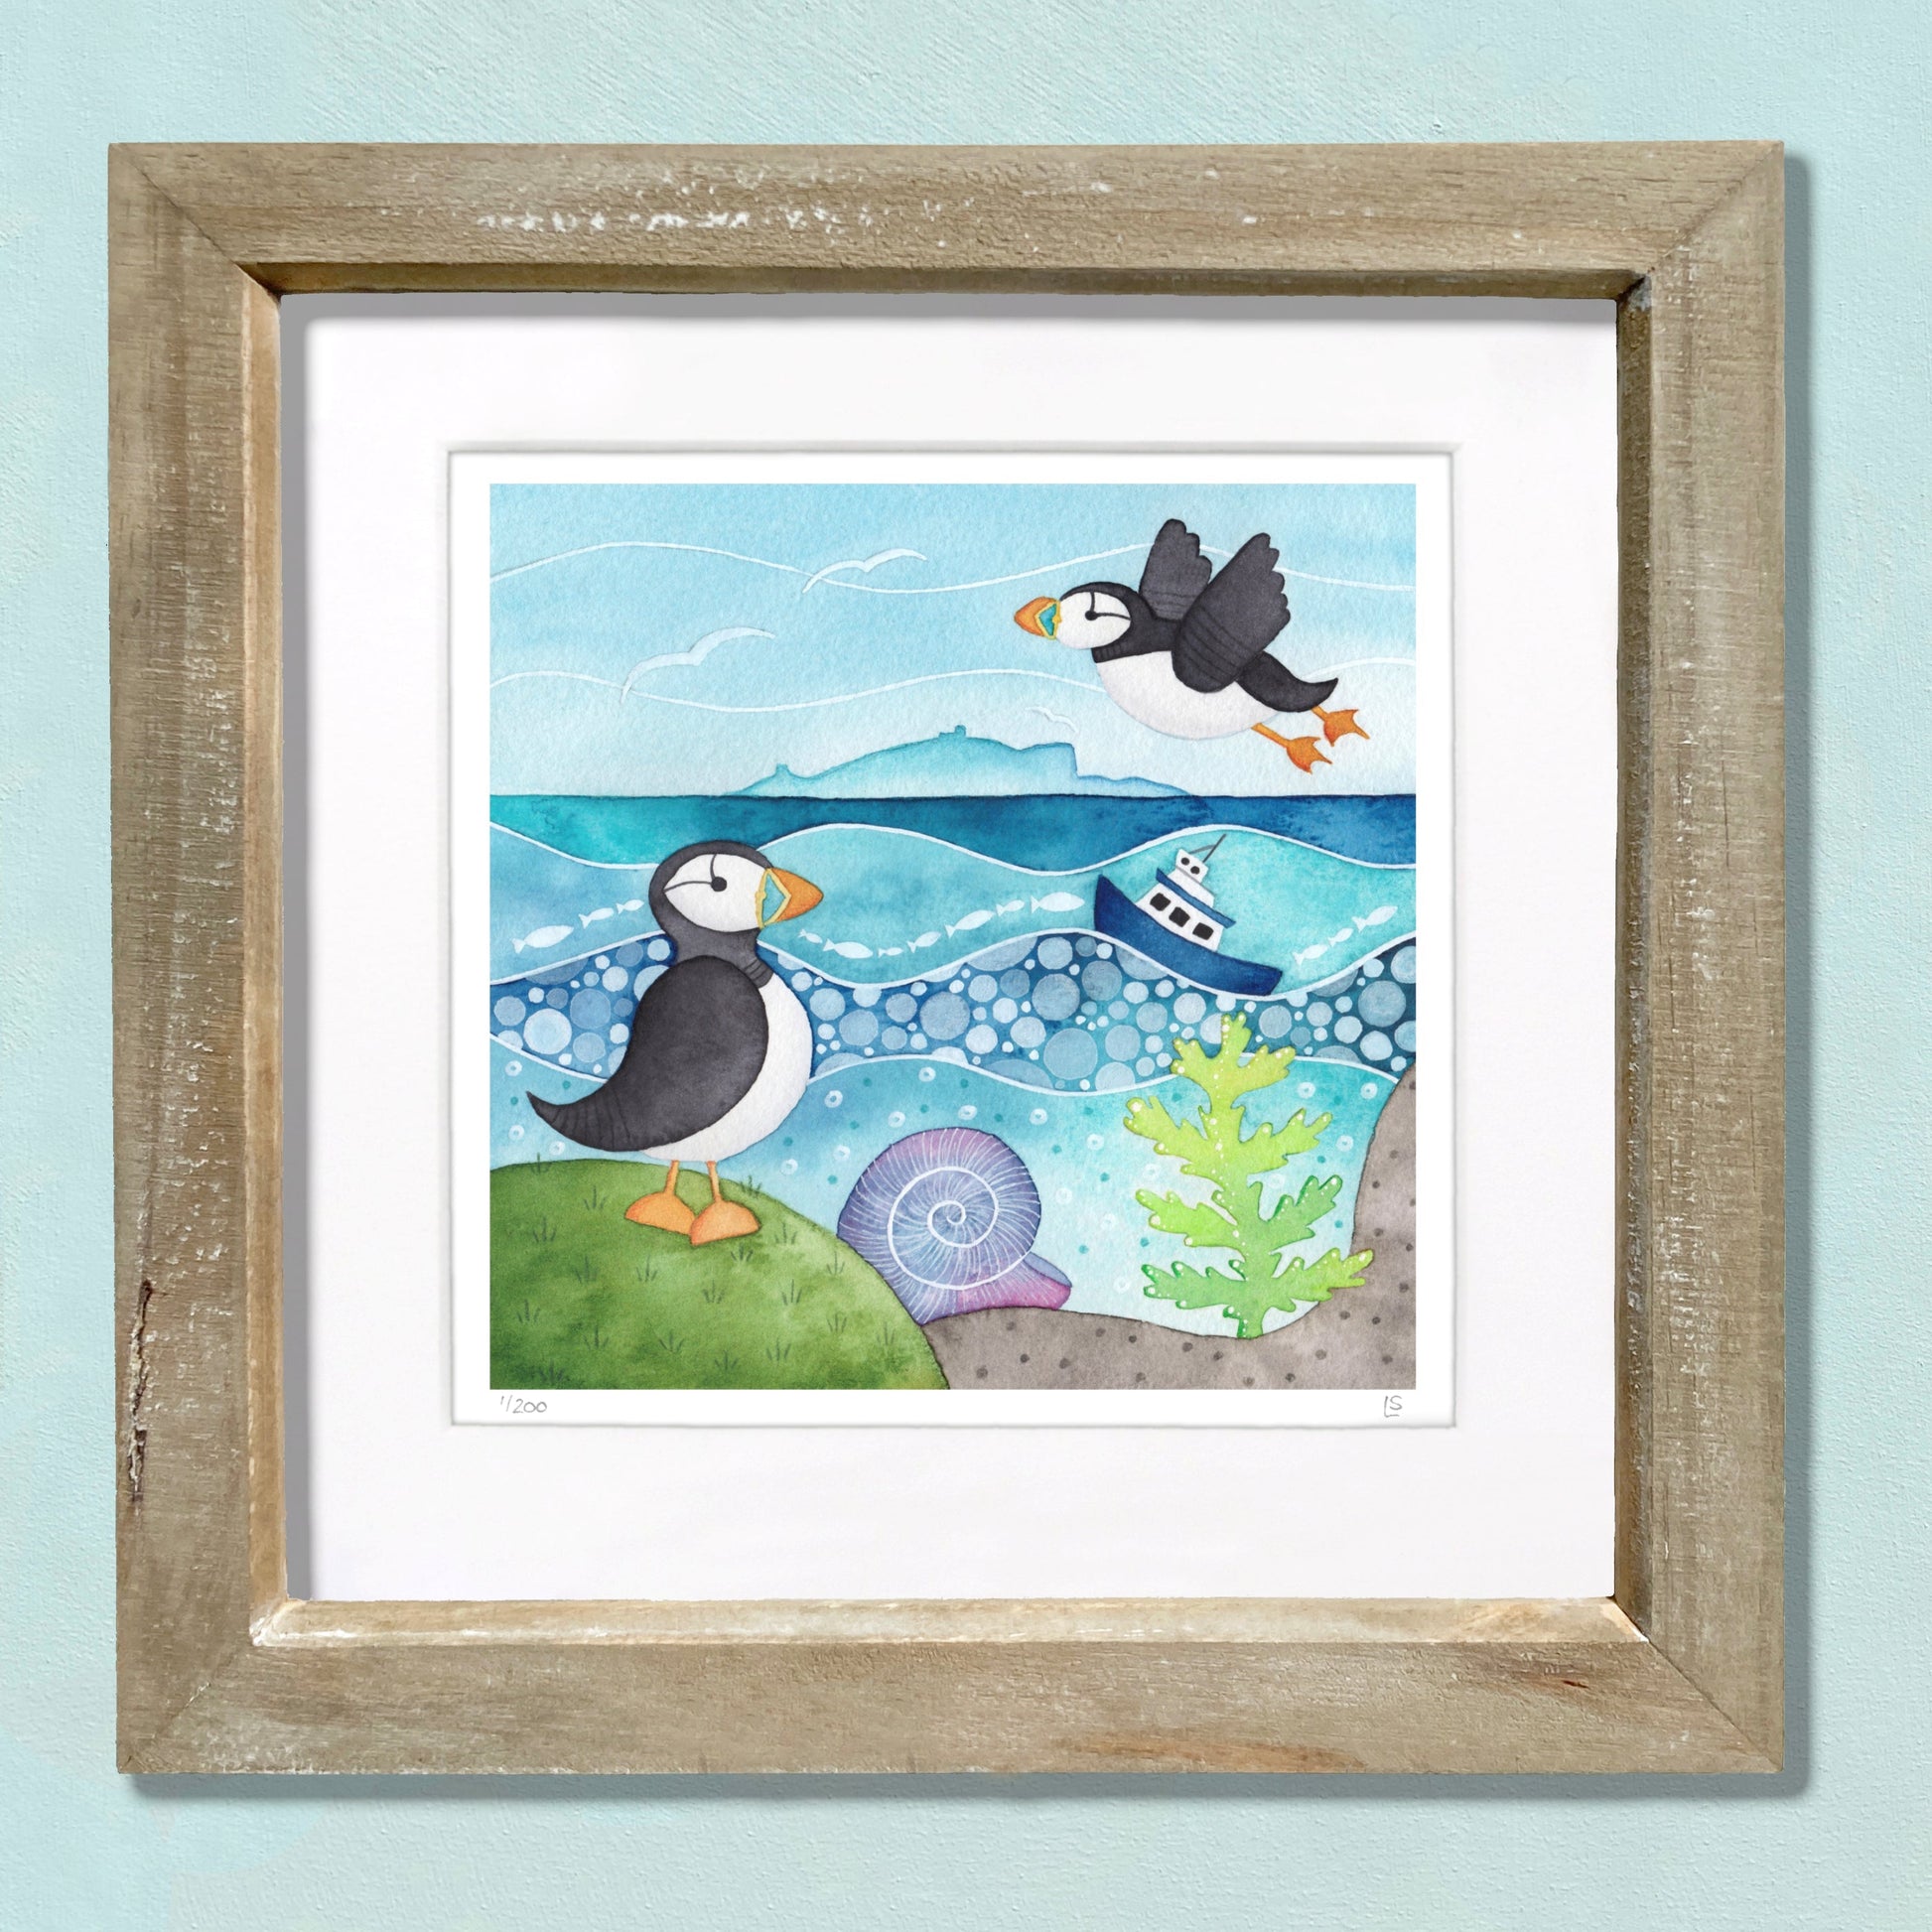 Isle of May Puffins - Seaside Watercolour Painting - Limited Edition Signed Art Print - East Neuk Beach Crafts